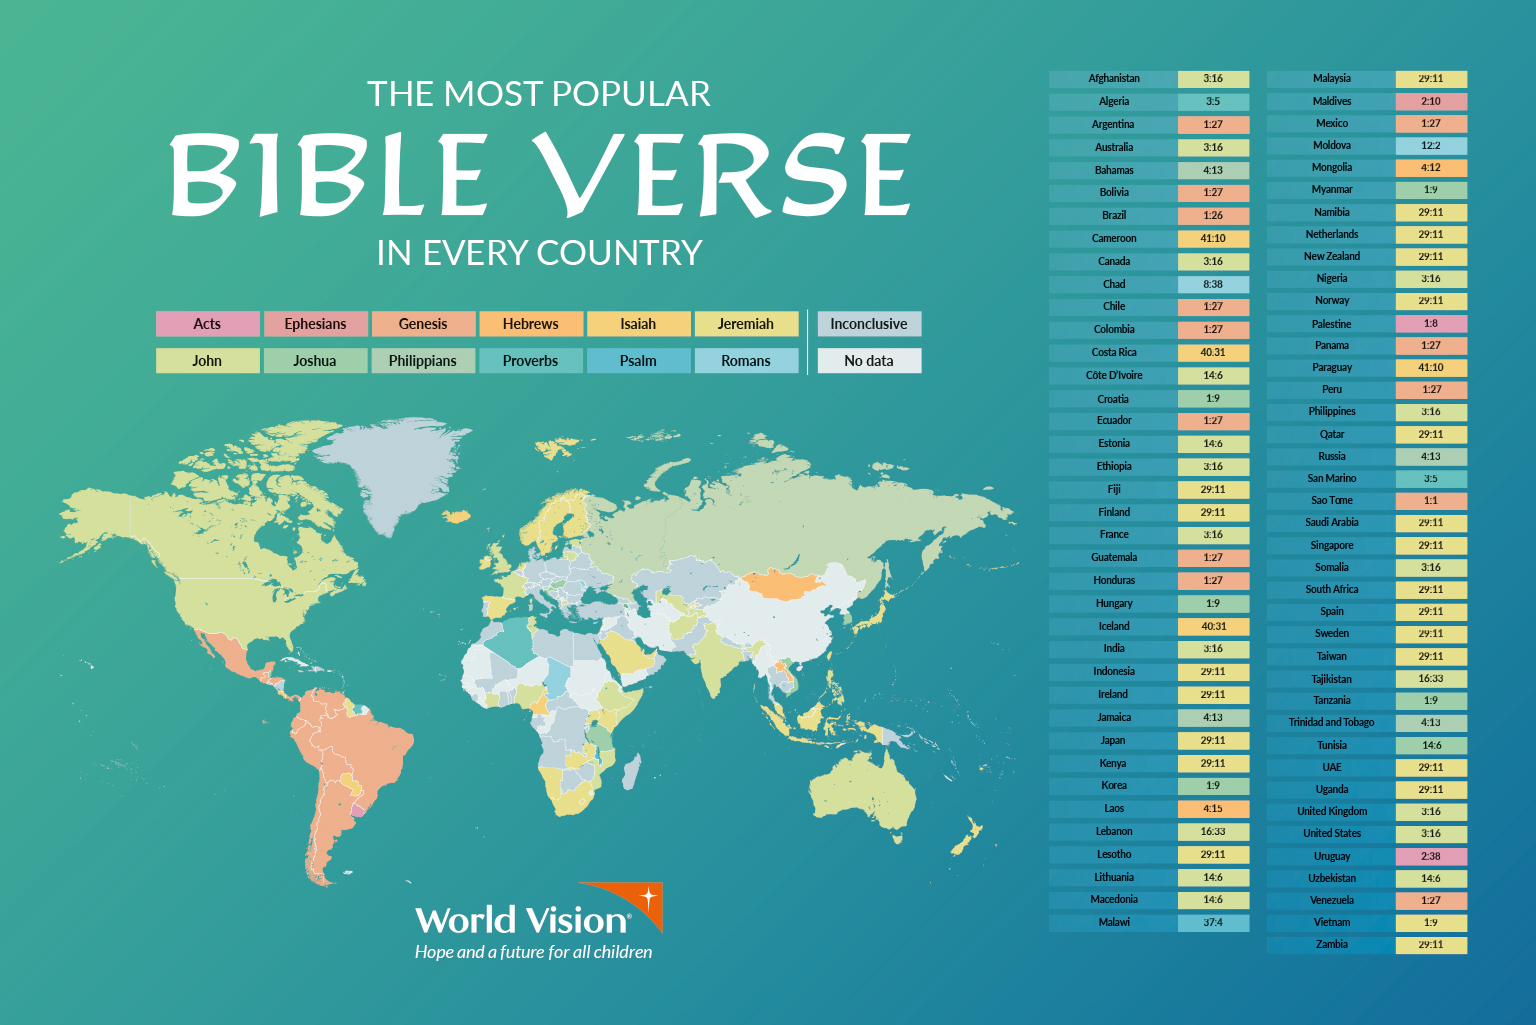 Most popular Bible verse in the world